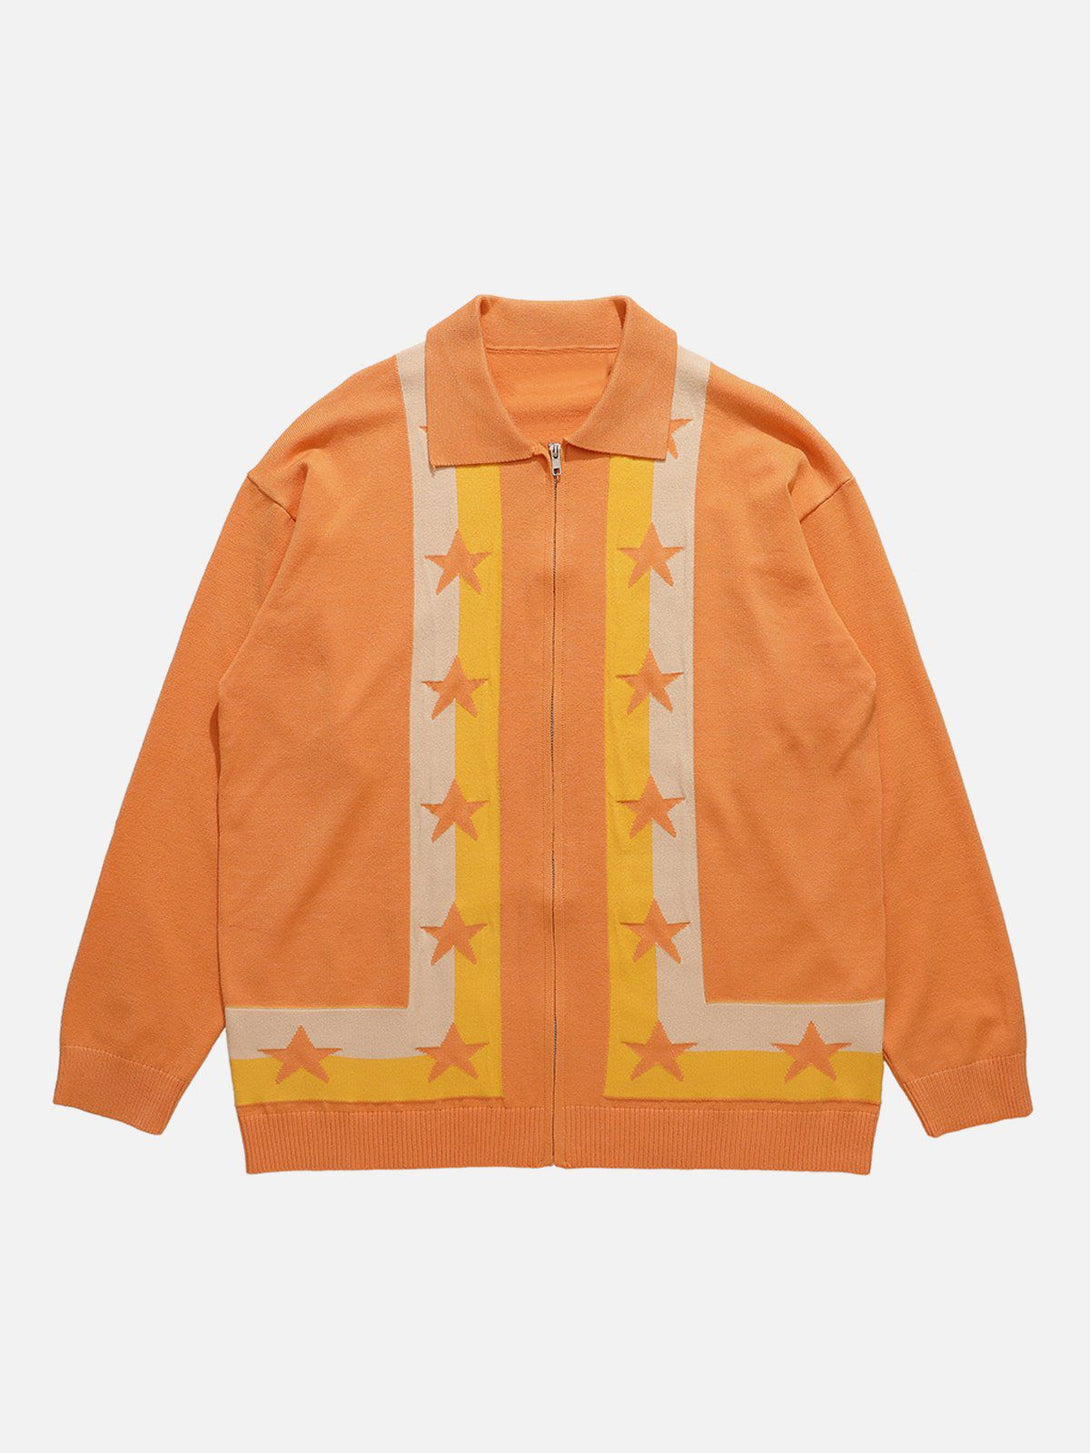 Levefly - Star Colorblock Embroidery Cardigan - Streetwear Fashion - levefly.com